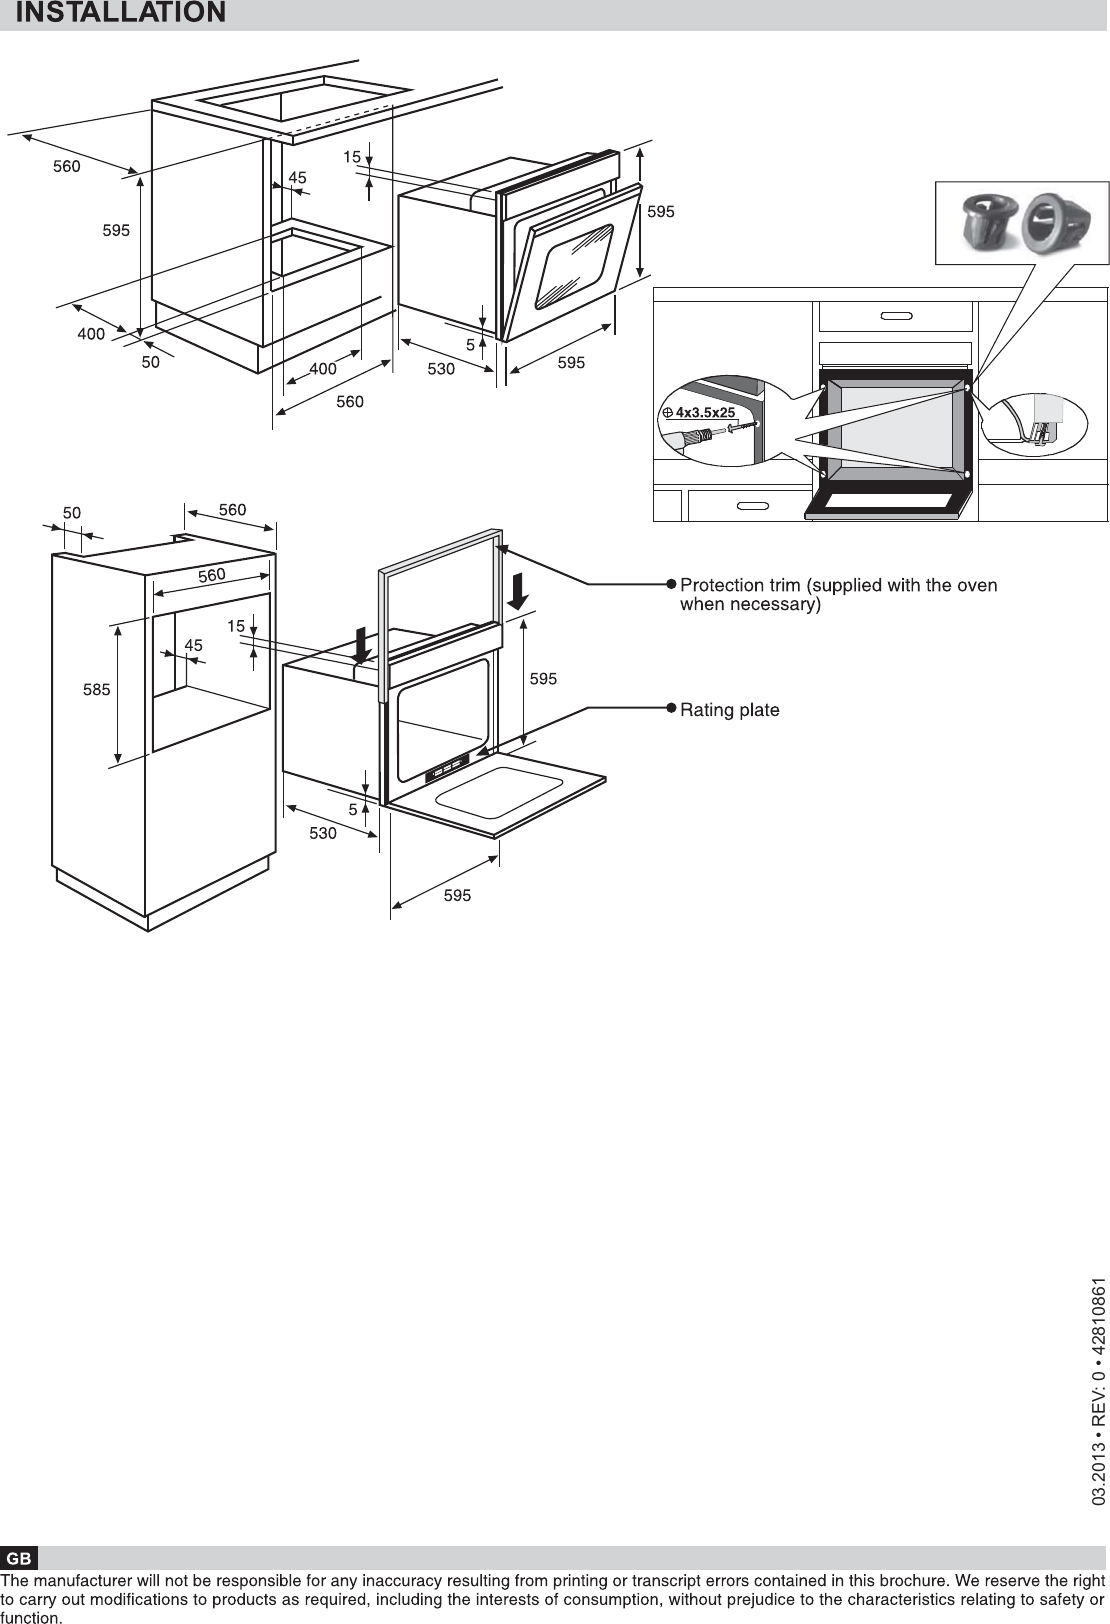 Page 10 of 10 - Hoover Fan Oven HO 423 VX Instruction Manual - Product Code 33701037 HO423VX